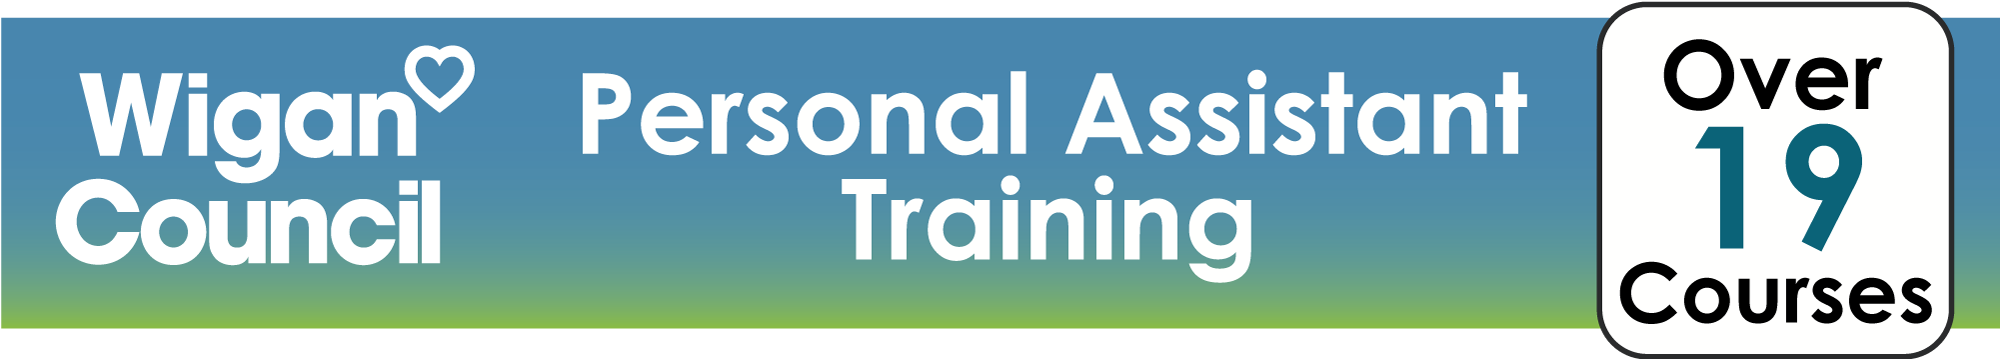 personal assistant training banner